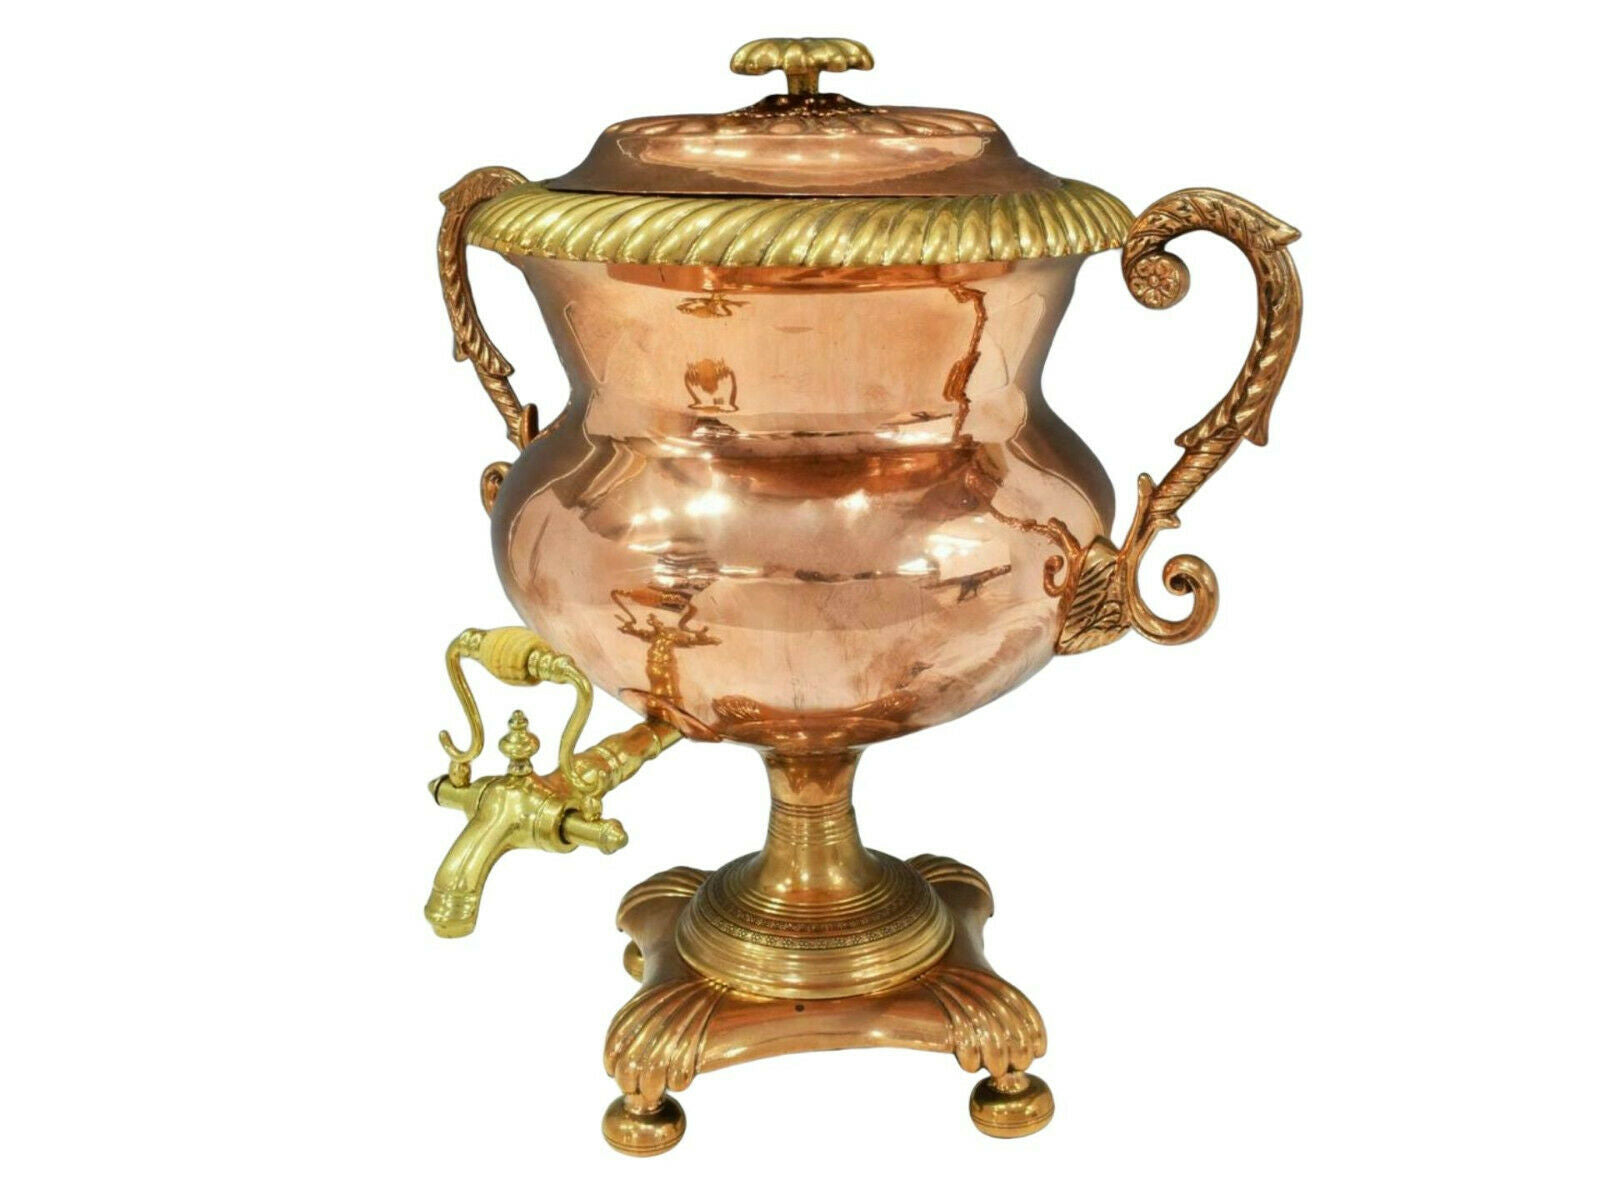 Antique Urn, Copper & Brass Samovar, English, Hot Water, Beautiful  Collectible!